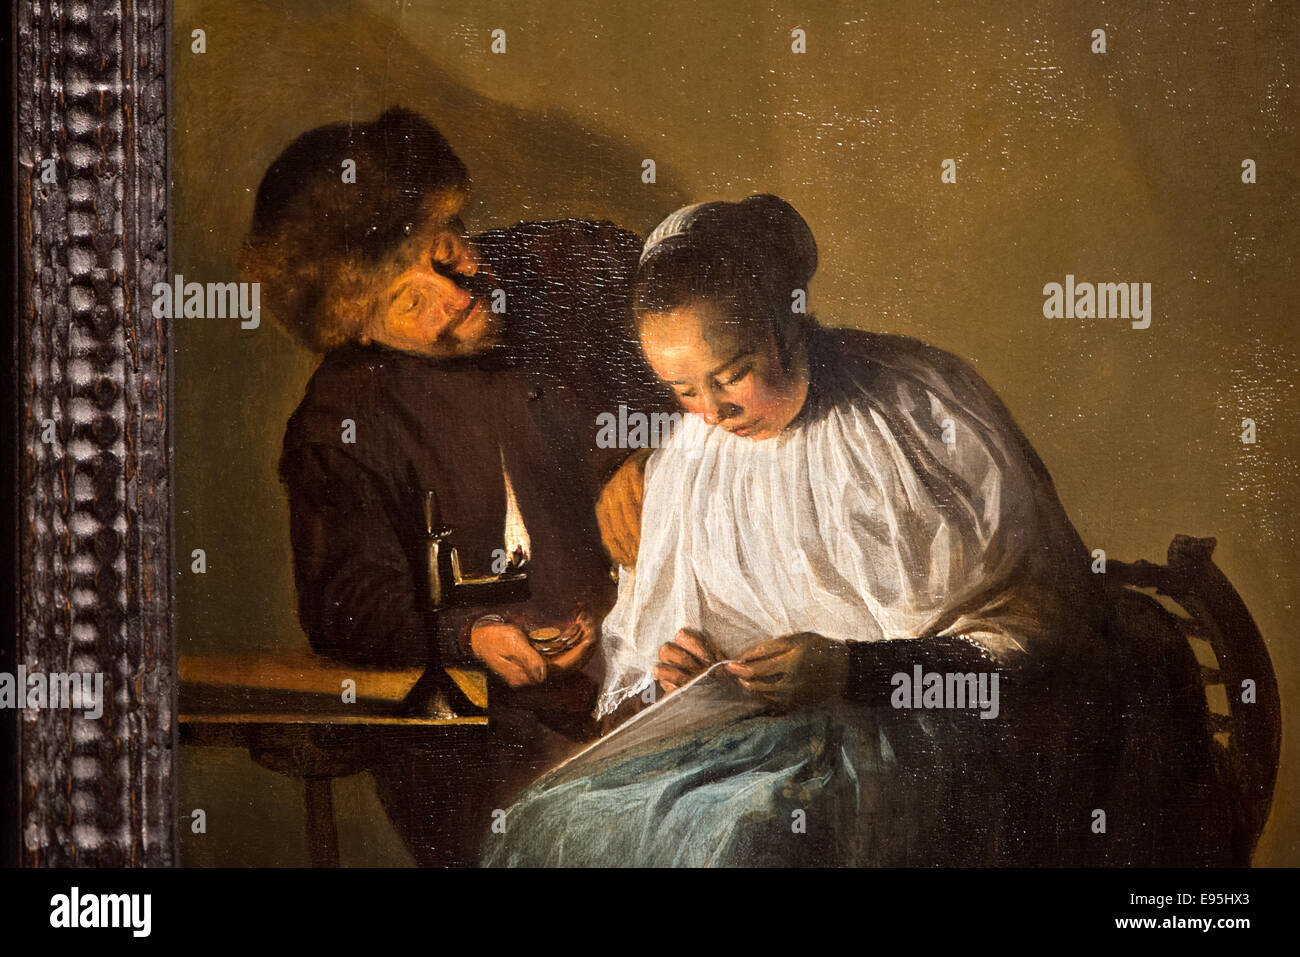 man offering money to young woman from dutch painter judith leyster 1631 Stock Photo